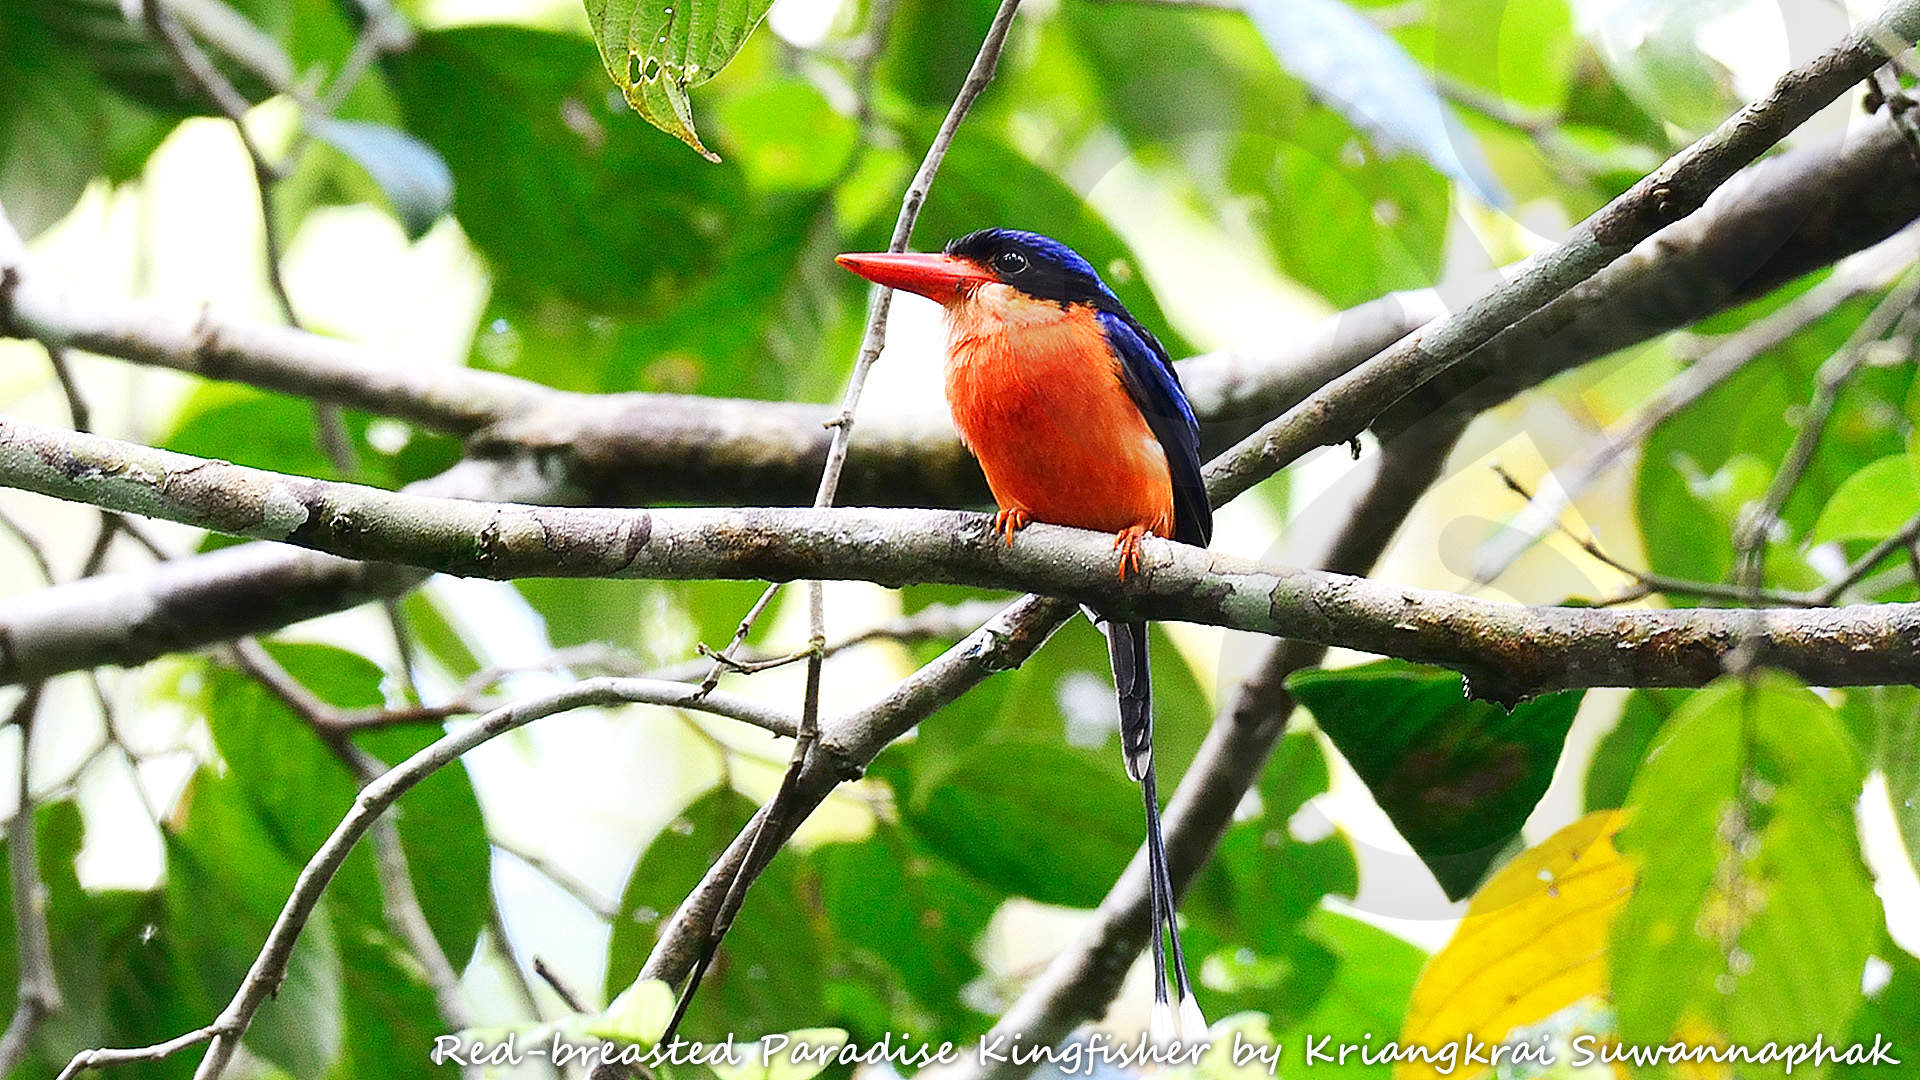 The restricted-range Red-breasted Paradise Kingfisher Tanysiptera nympha is mysteriously absent from many seemingly suitable forested localities within the Bird's Head or Vogelkop lowlands, and could be the highlight of a birding excursion around Sorong. Copyright © Kriangkrai Suwannaphak